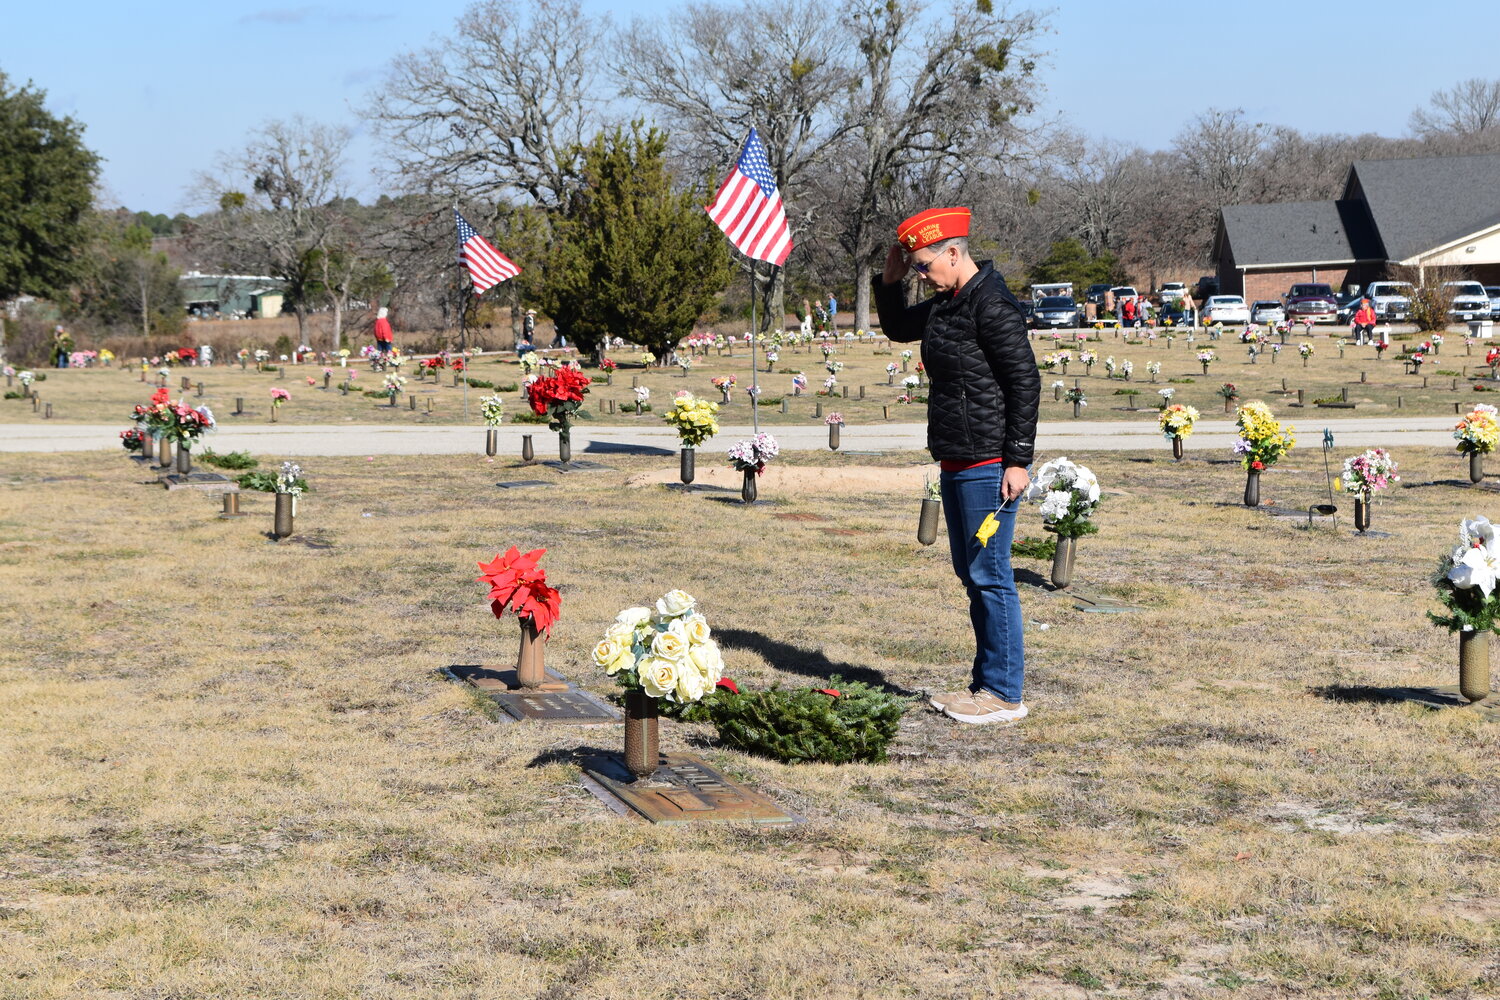 Jenni Biesheuvel with the Wood County Marine Corps League salutes after placing a wreath on a veteran’s grave at Roselawn Memorial Garden north of Mineola Saturday.